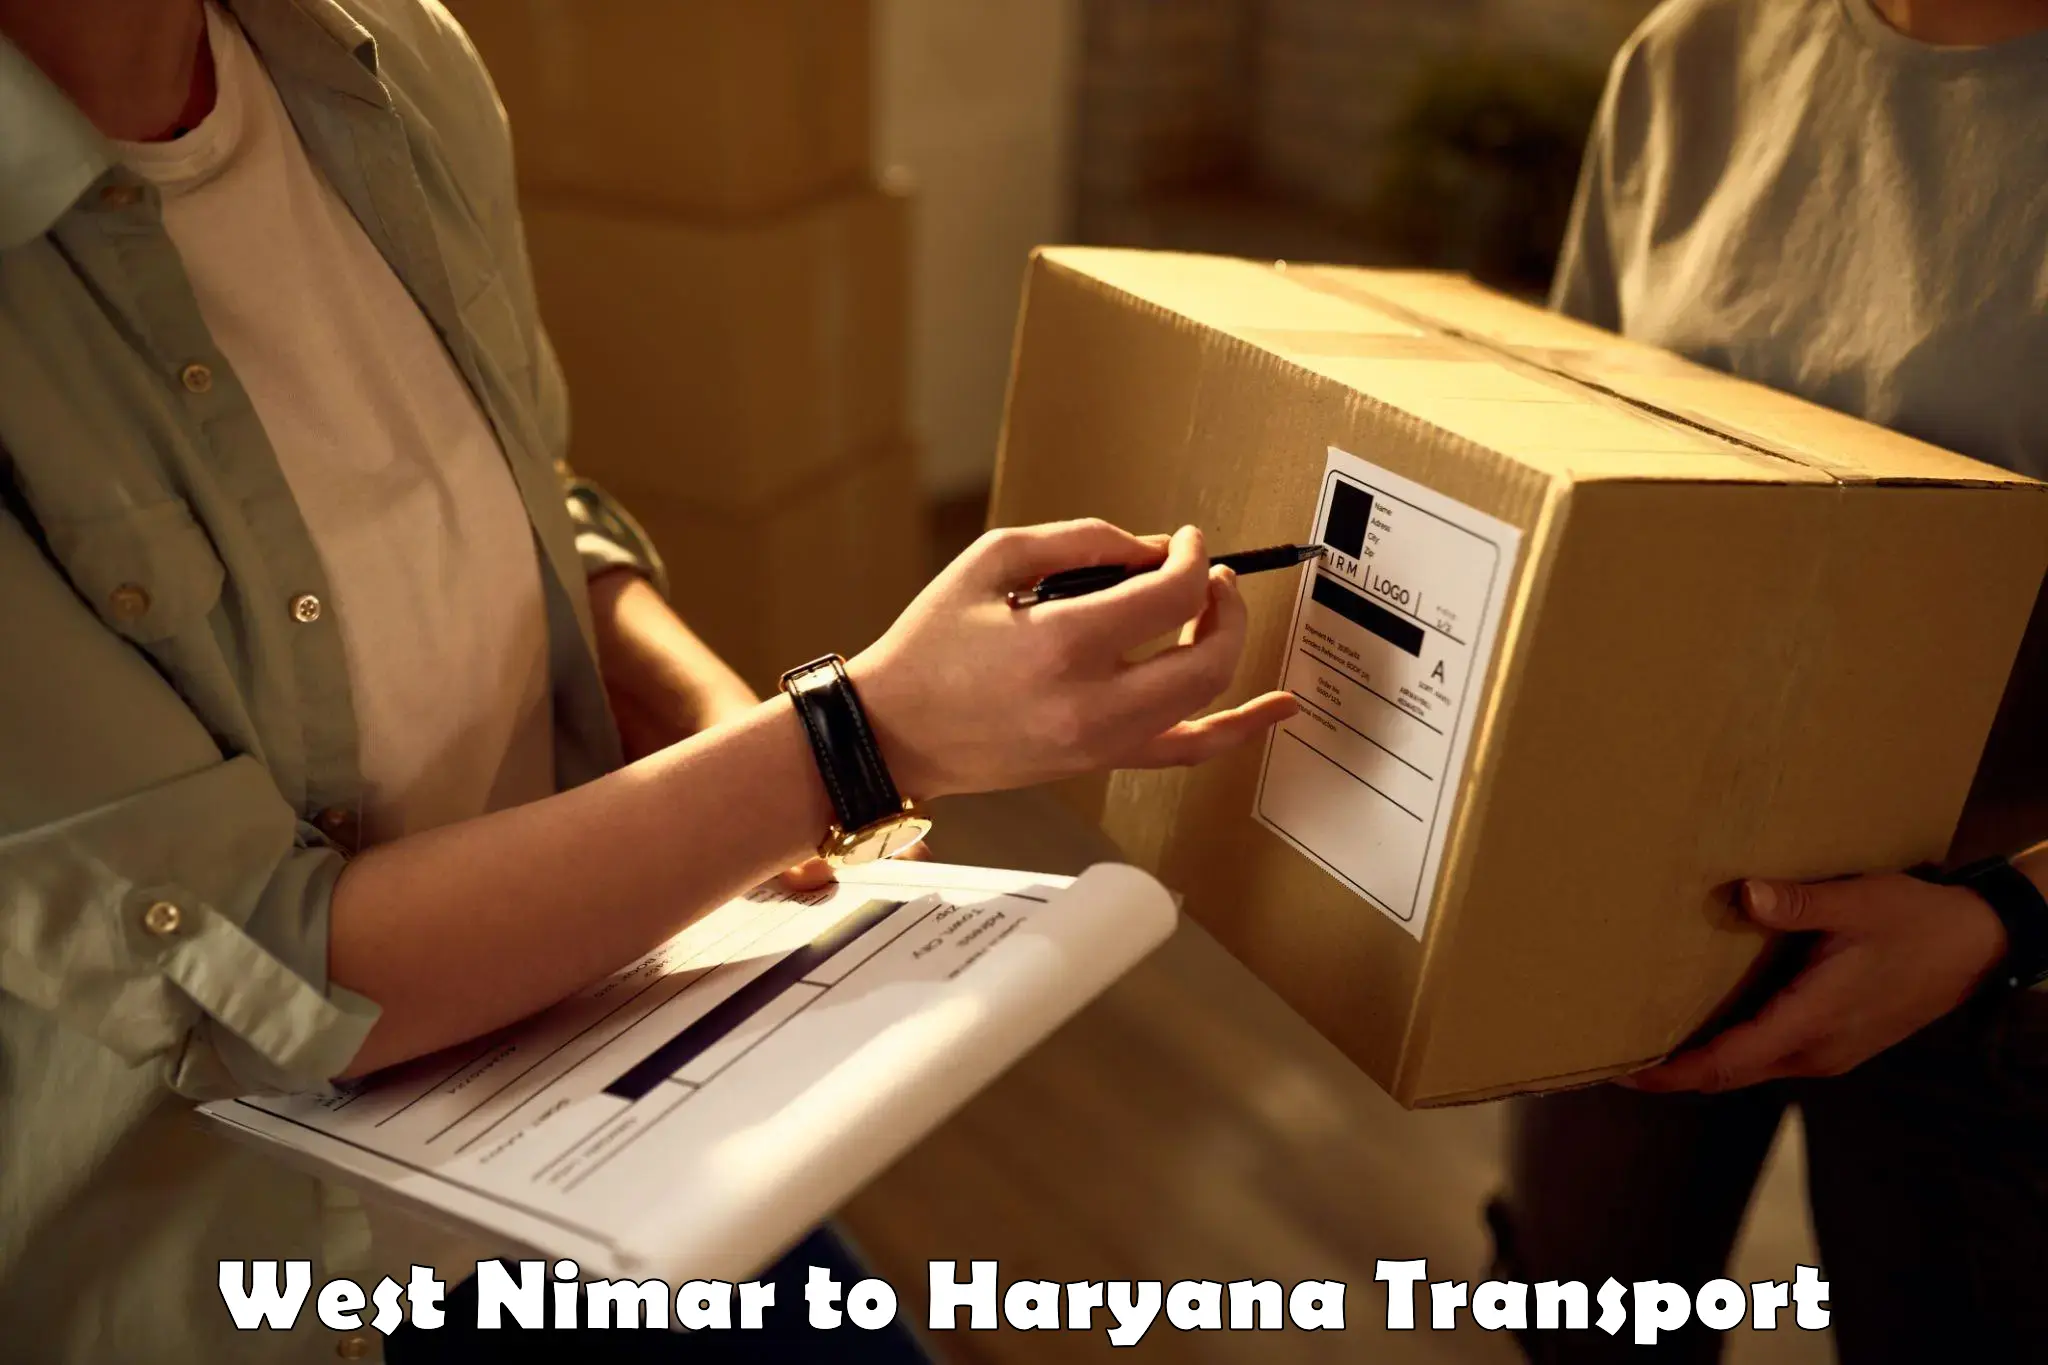 Transportation services in West Nimar to Sirsa